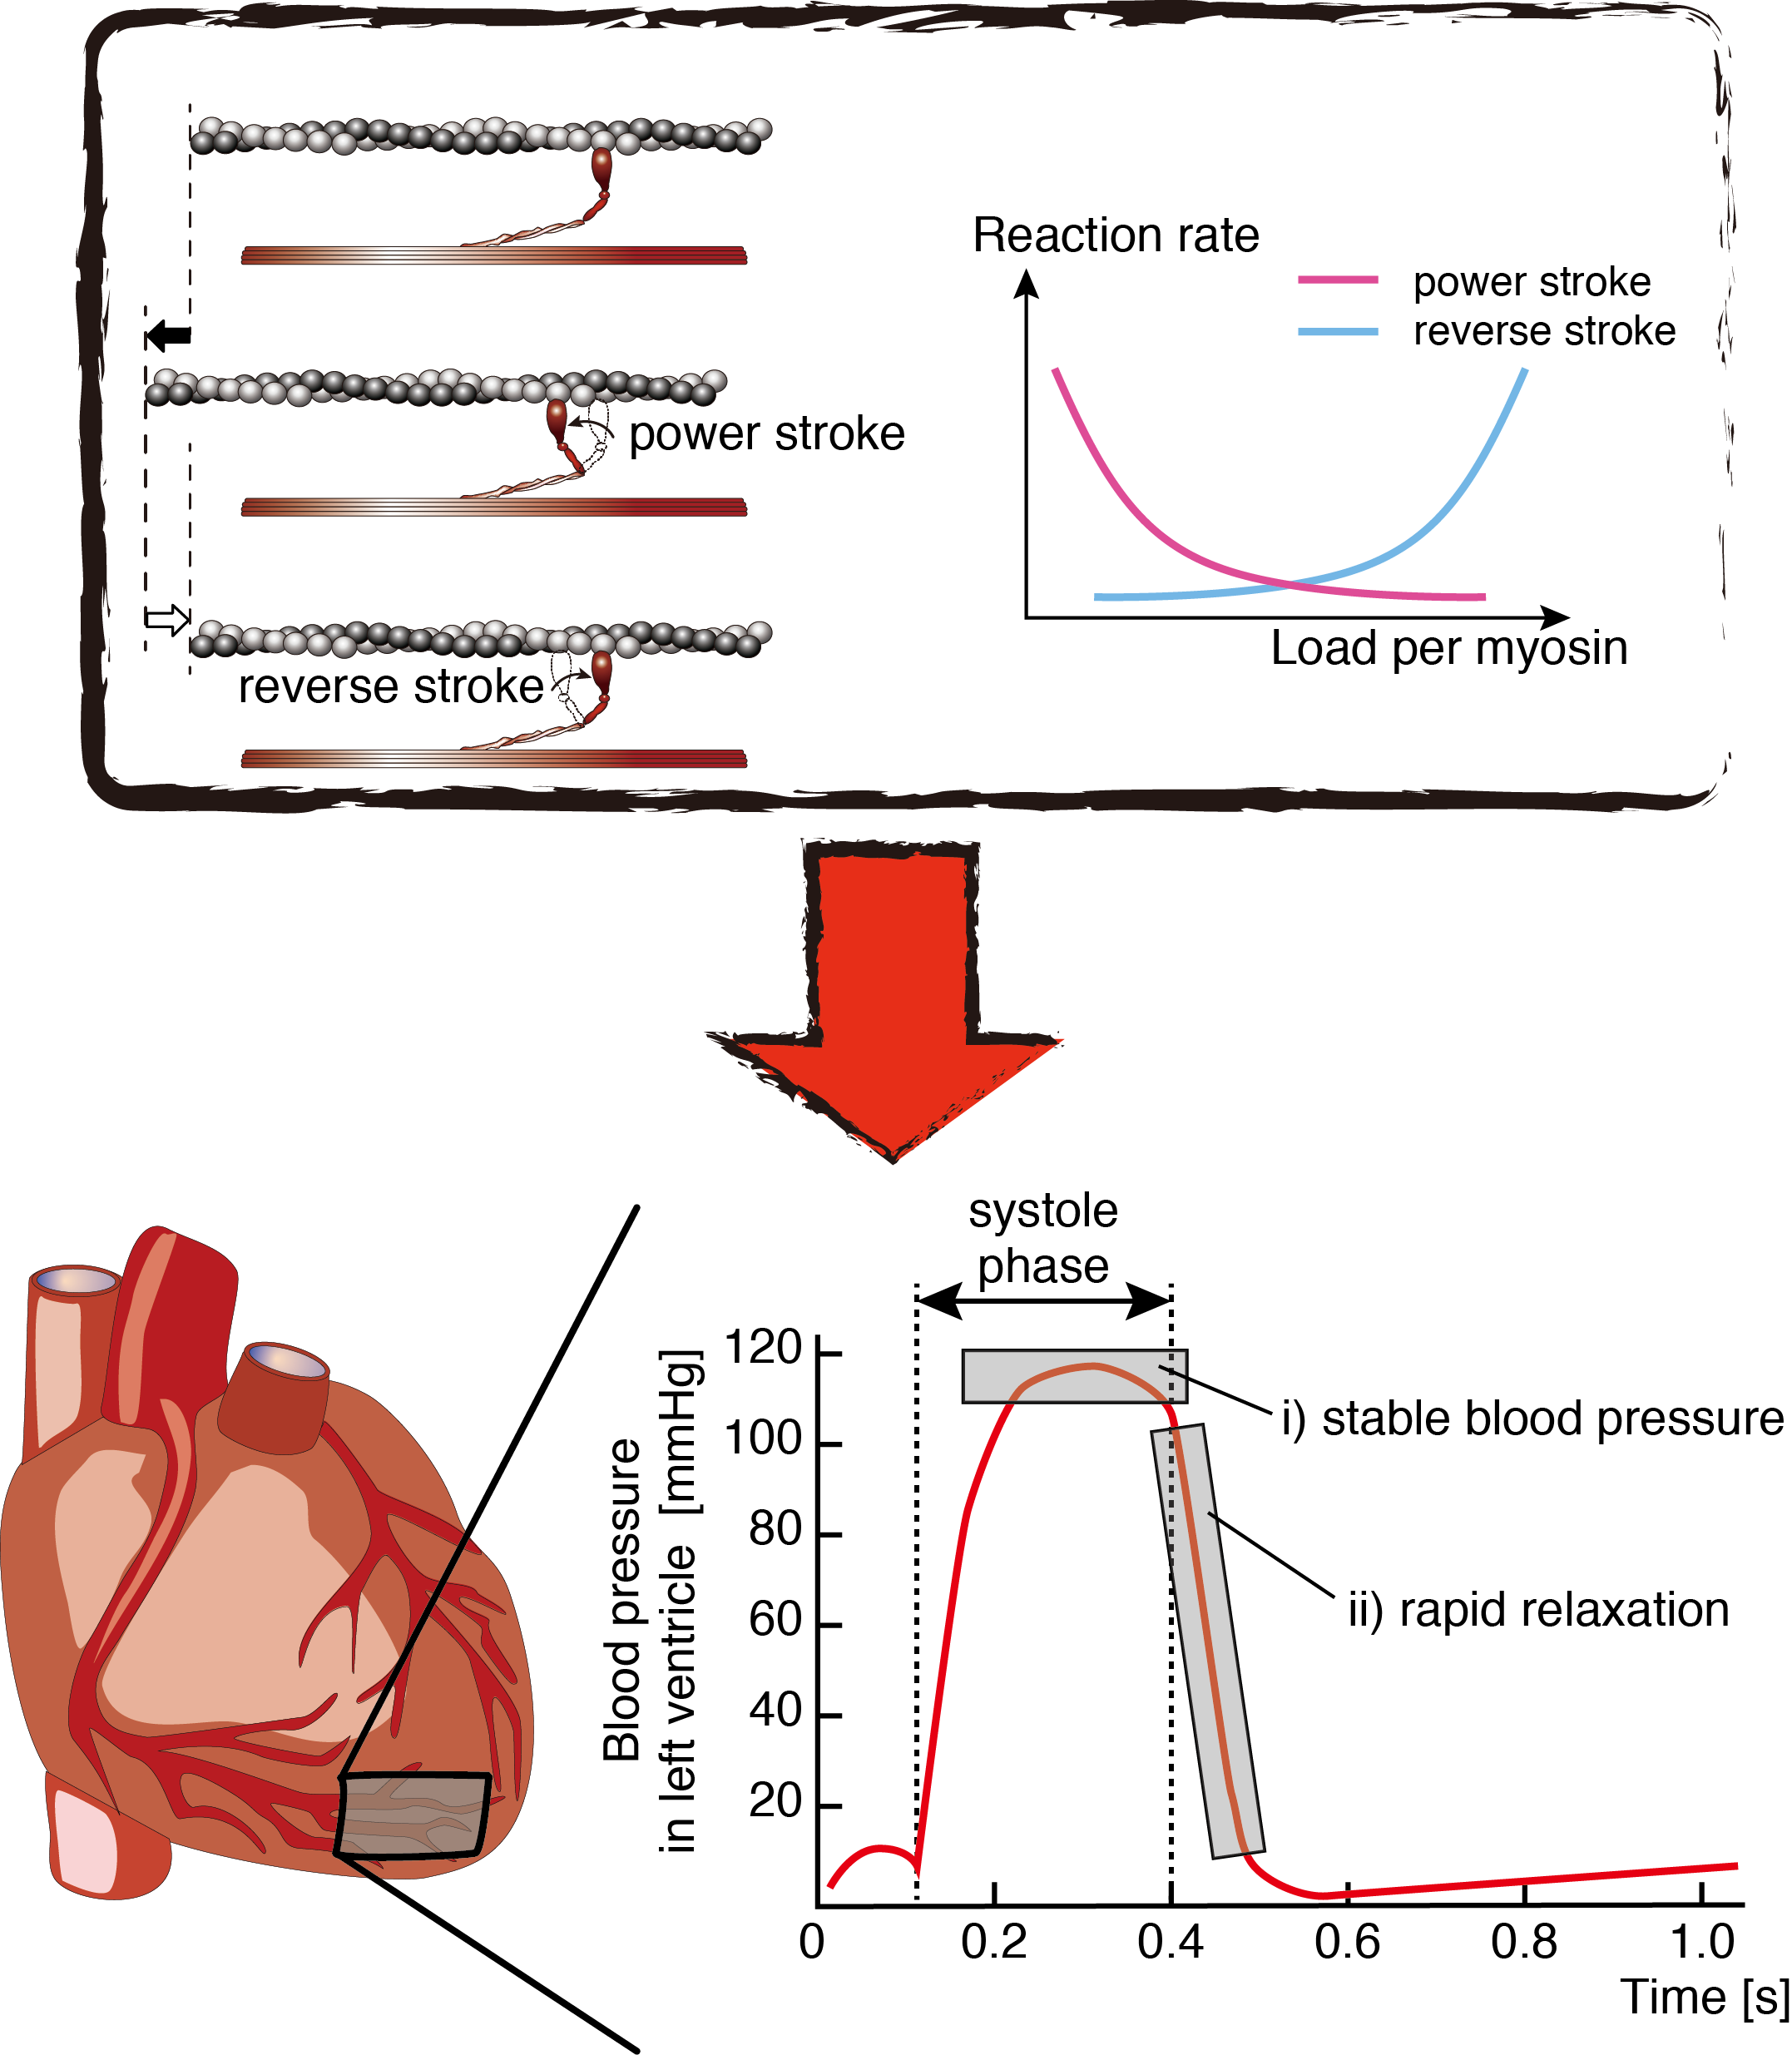 The search for molecular mechanisms of stable and economical heart contractions planted in cardiac myosin 